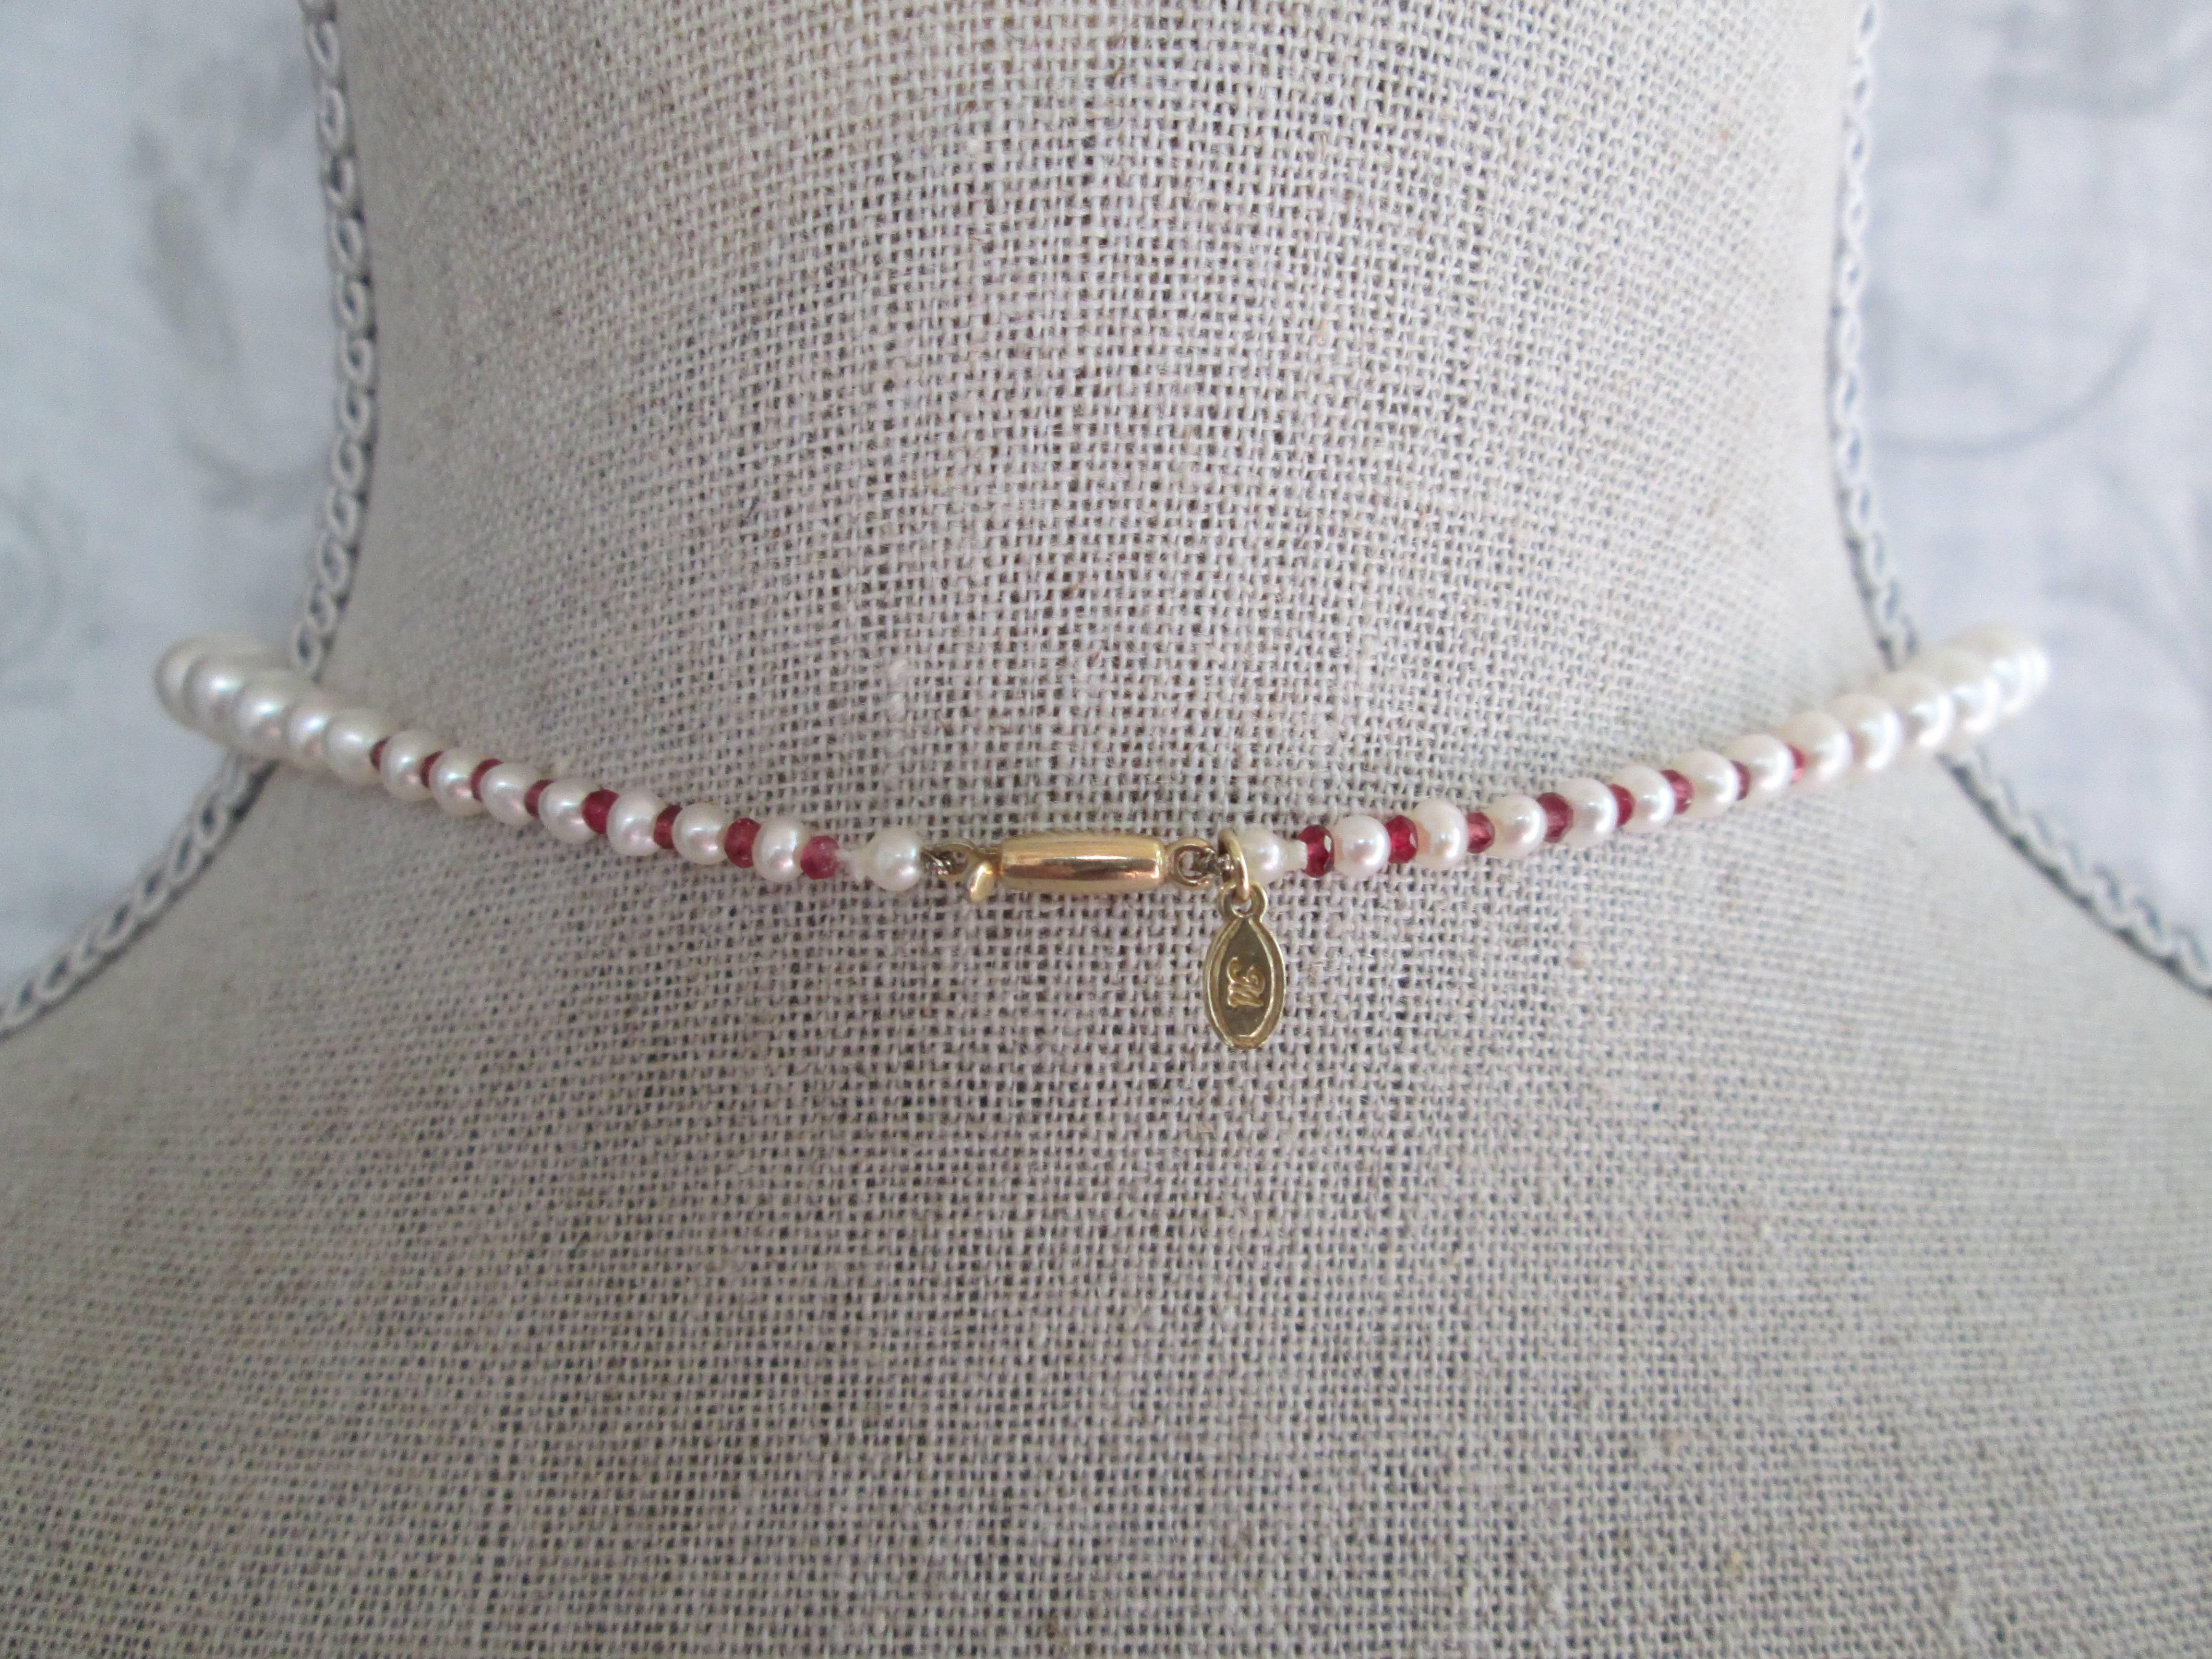 Marina J. 3 Strands of Graduated Pearl Necklace with Garnet & 14k Yellow Gold 4